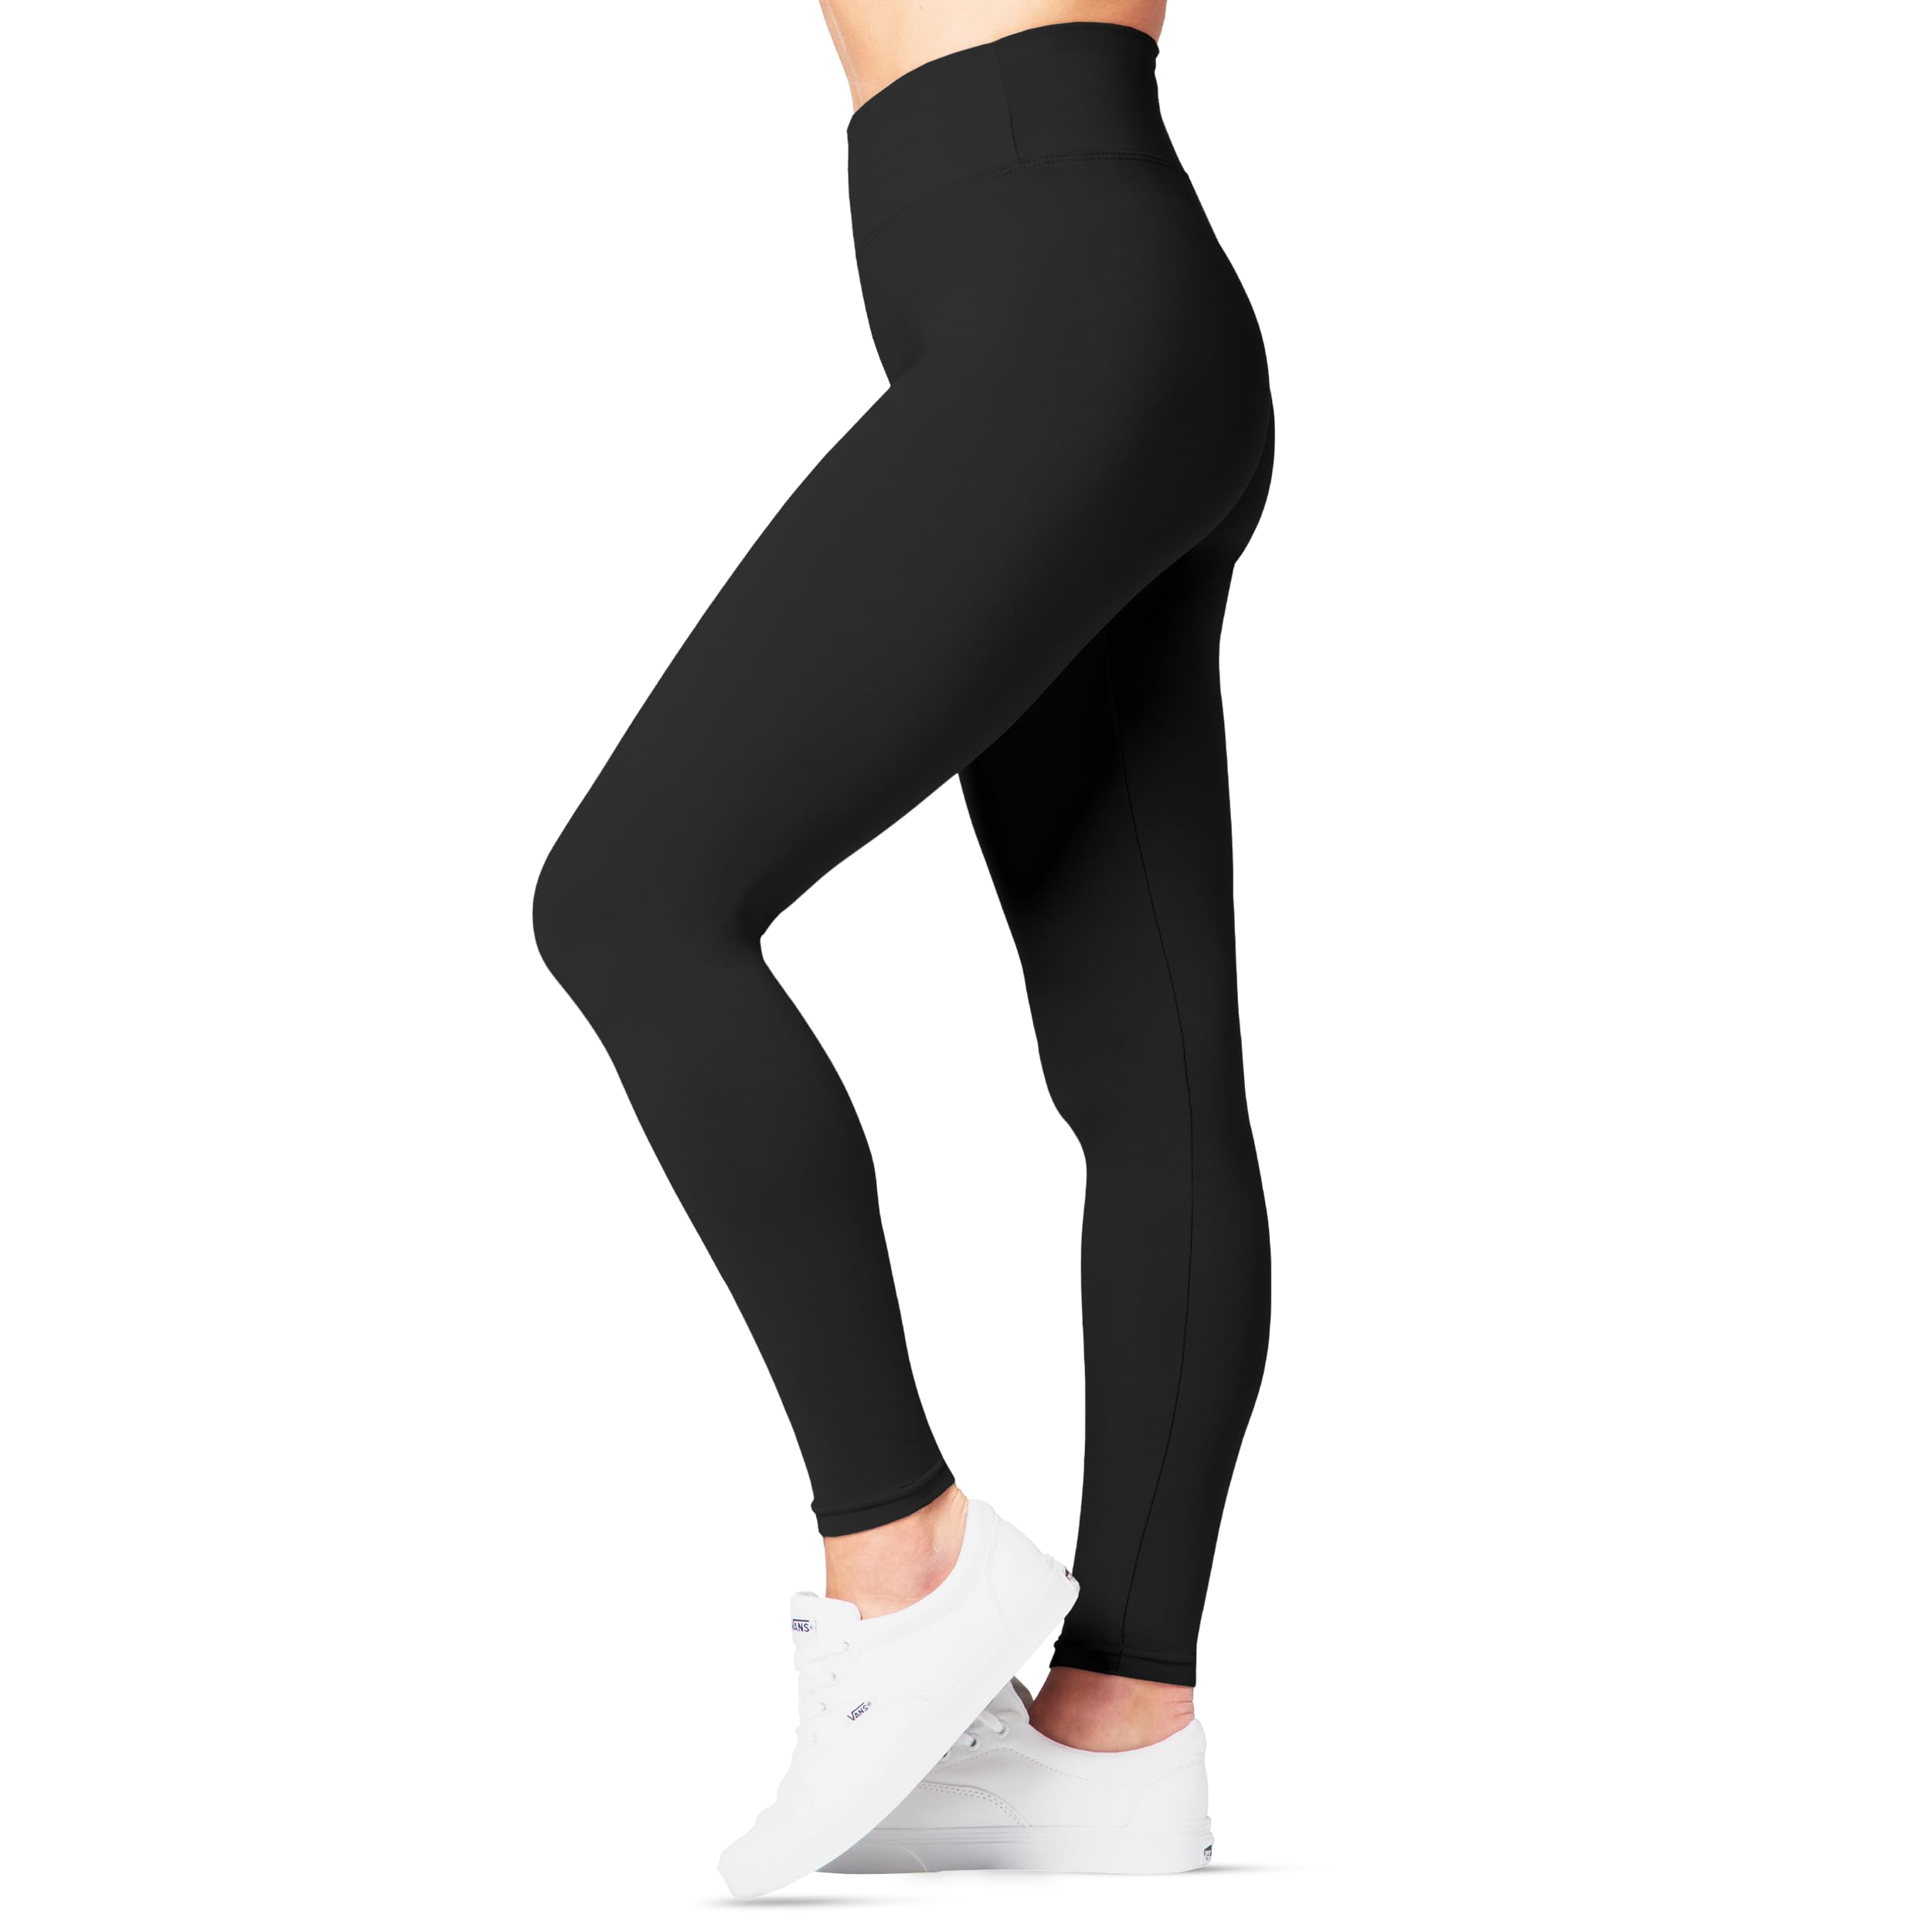 What You Should Know About SATINA High Waisted Women's Leggings